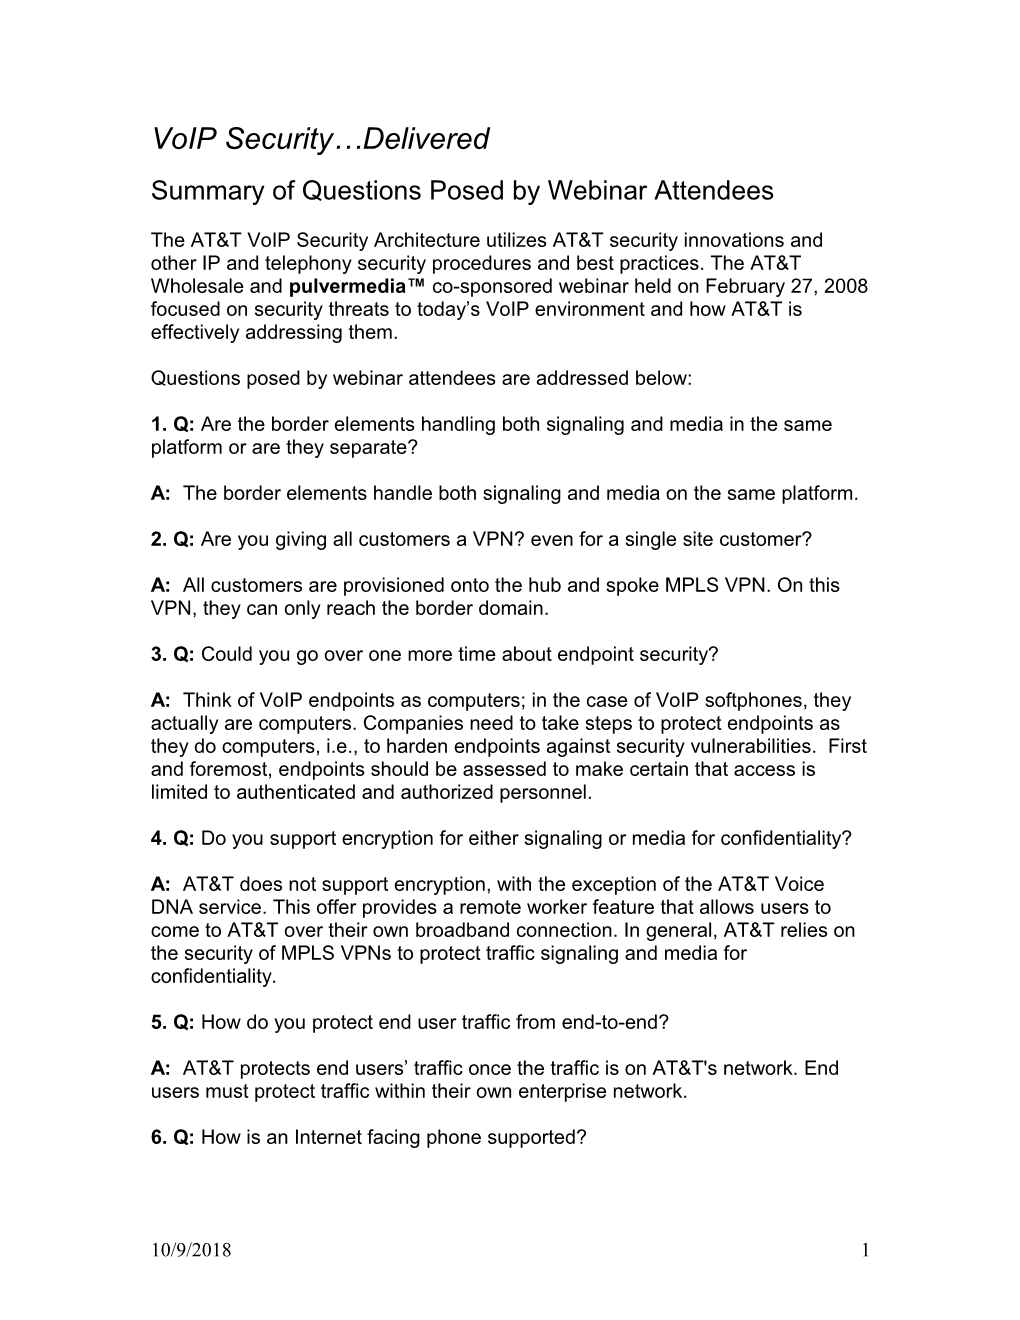 Summary of Questions Posed by Webinar Attendees